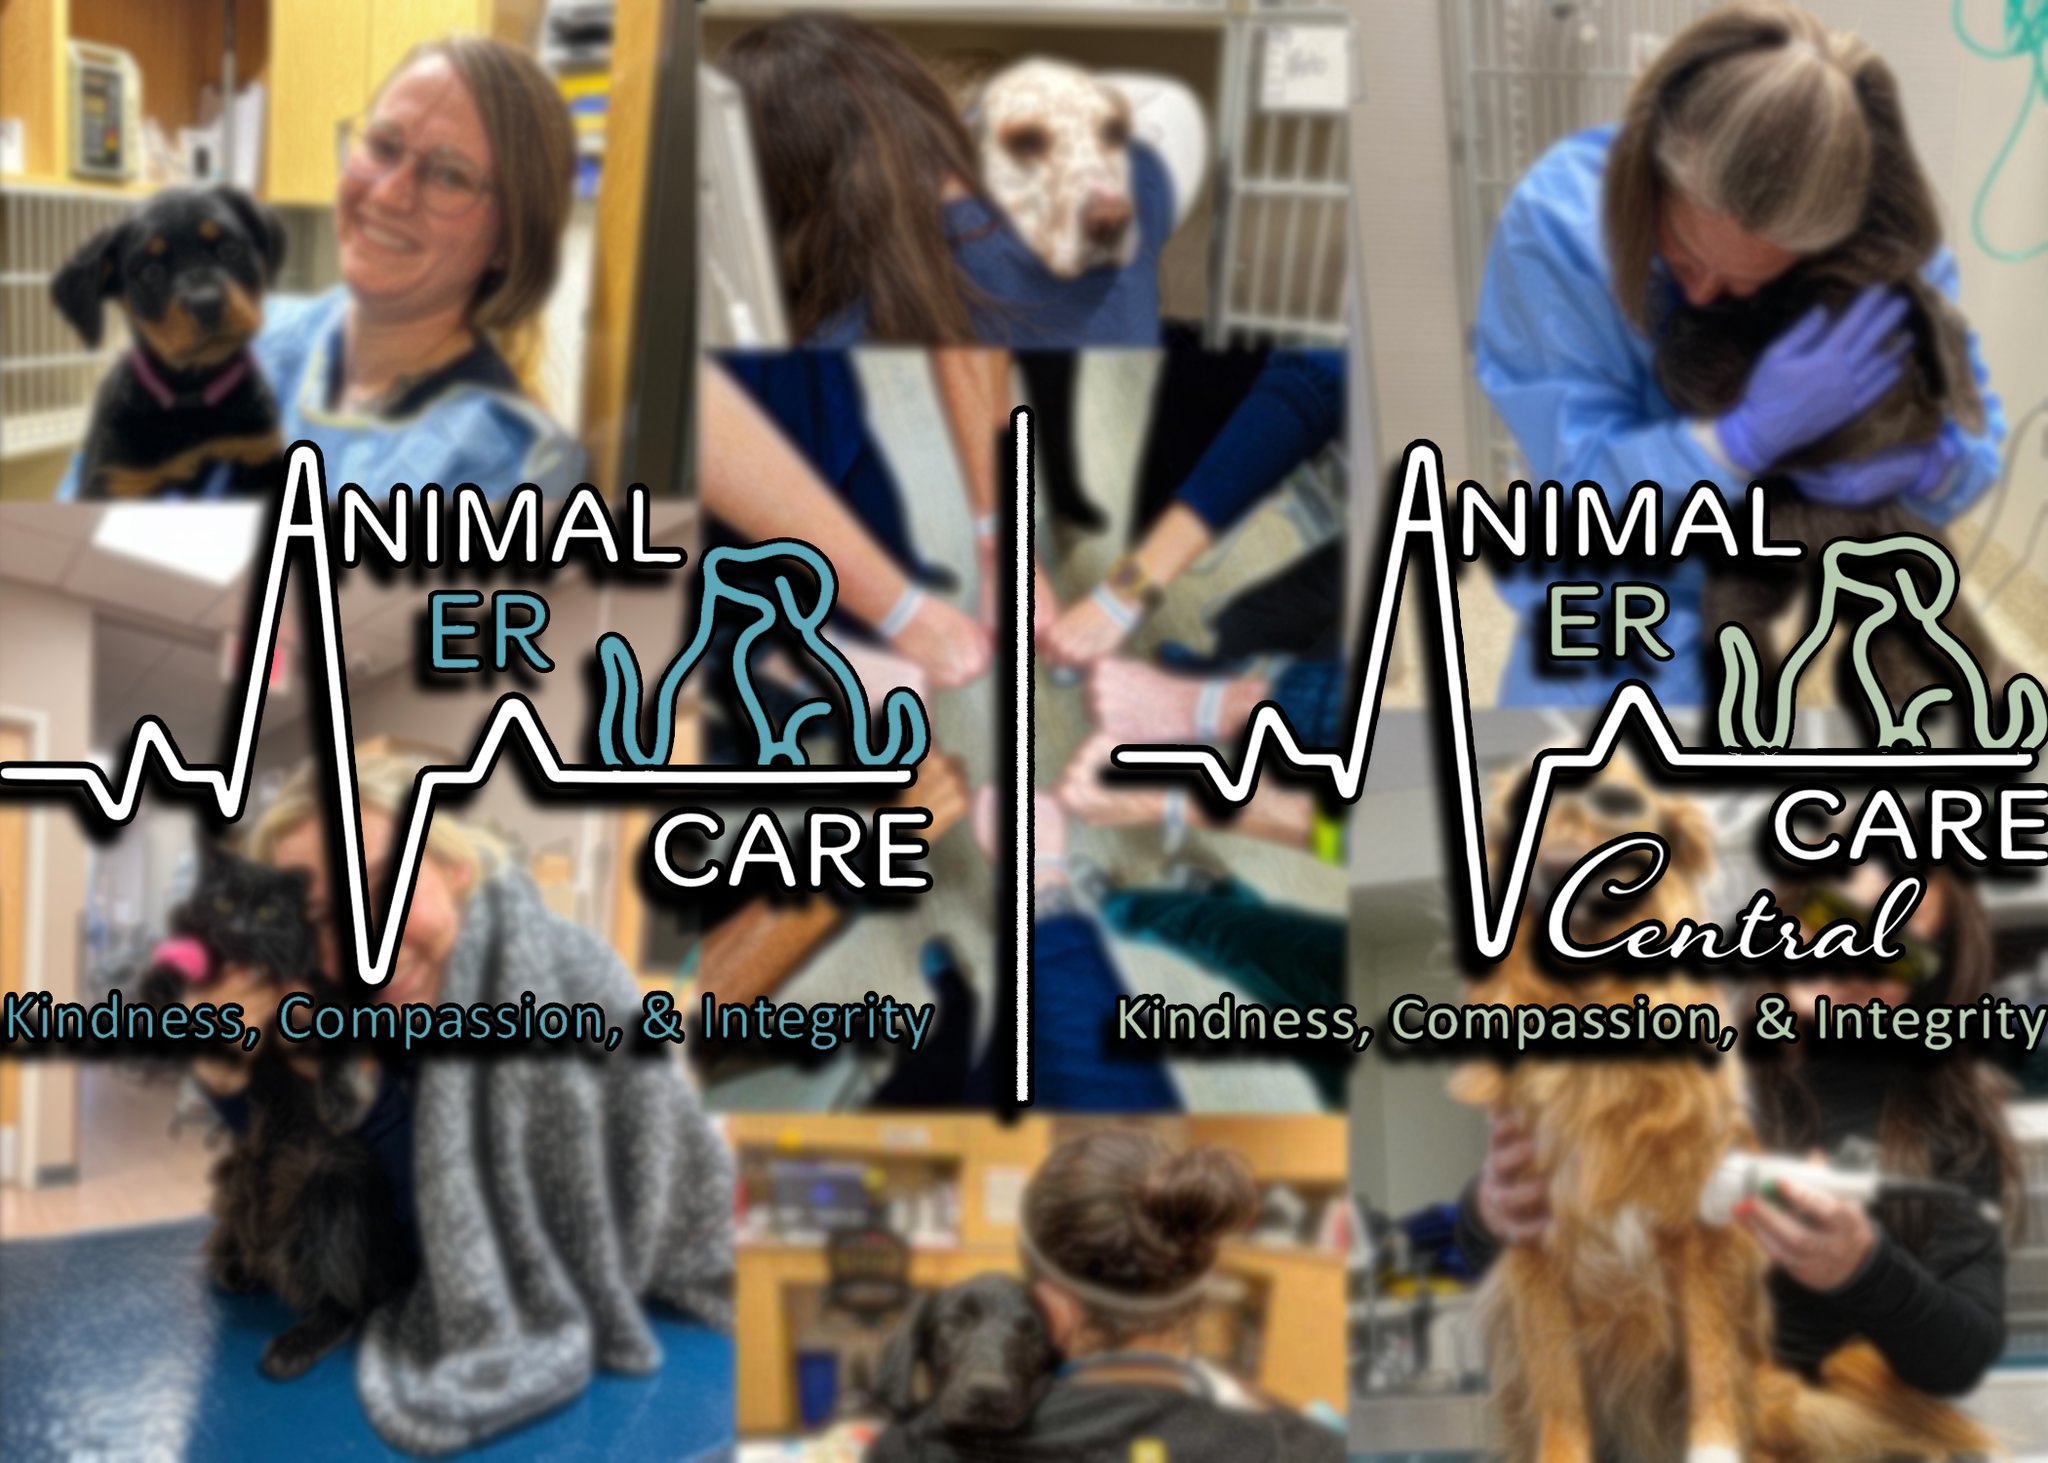 Animal ER Care Selected as Finalist for Colorado Companies to Watch